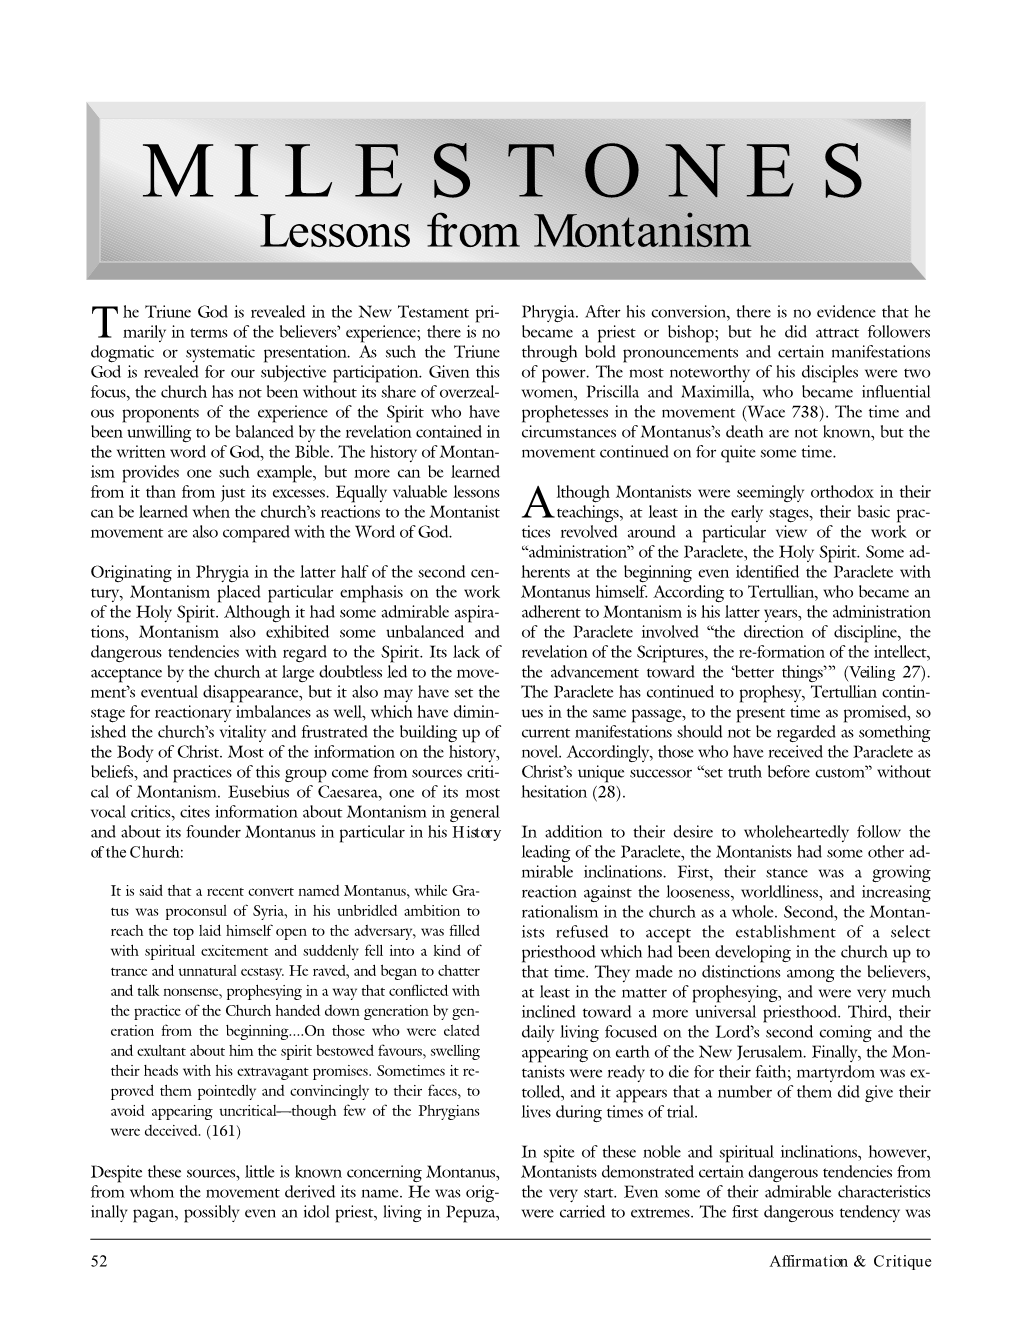 Milestones Lessons from Montanism